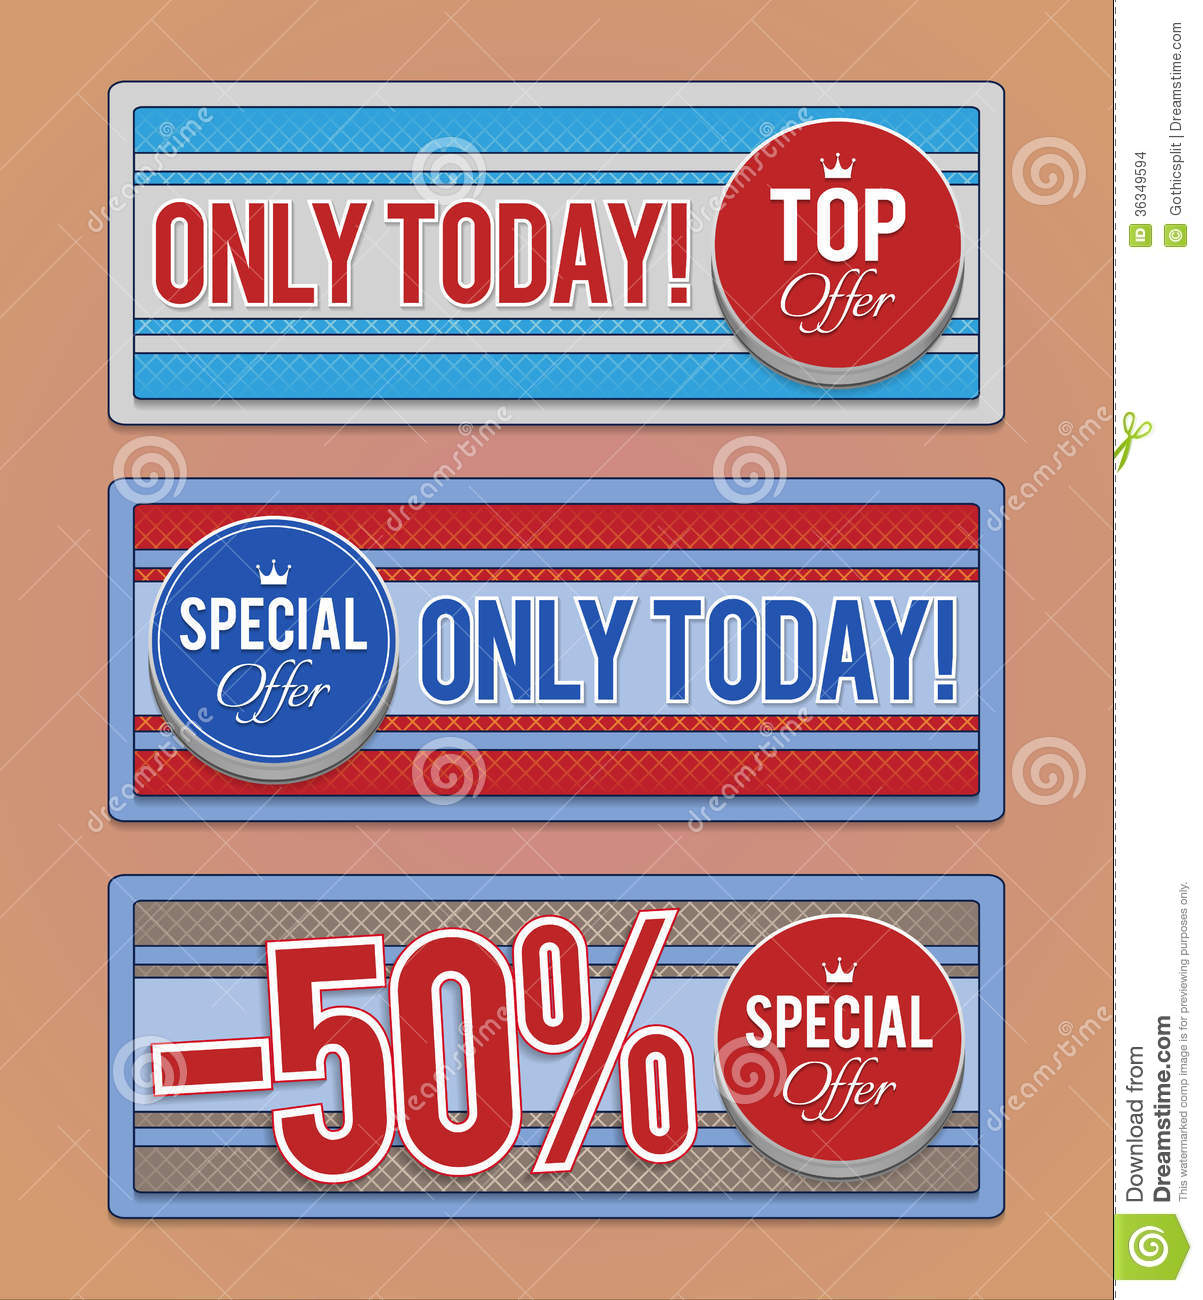 Sale Promotion Banners Stock Images   Image  36349594